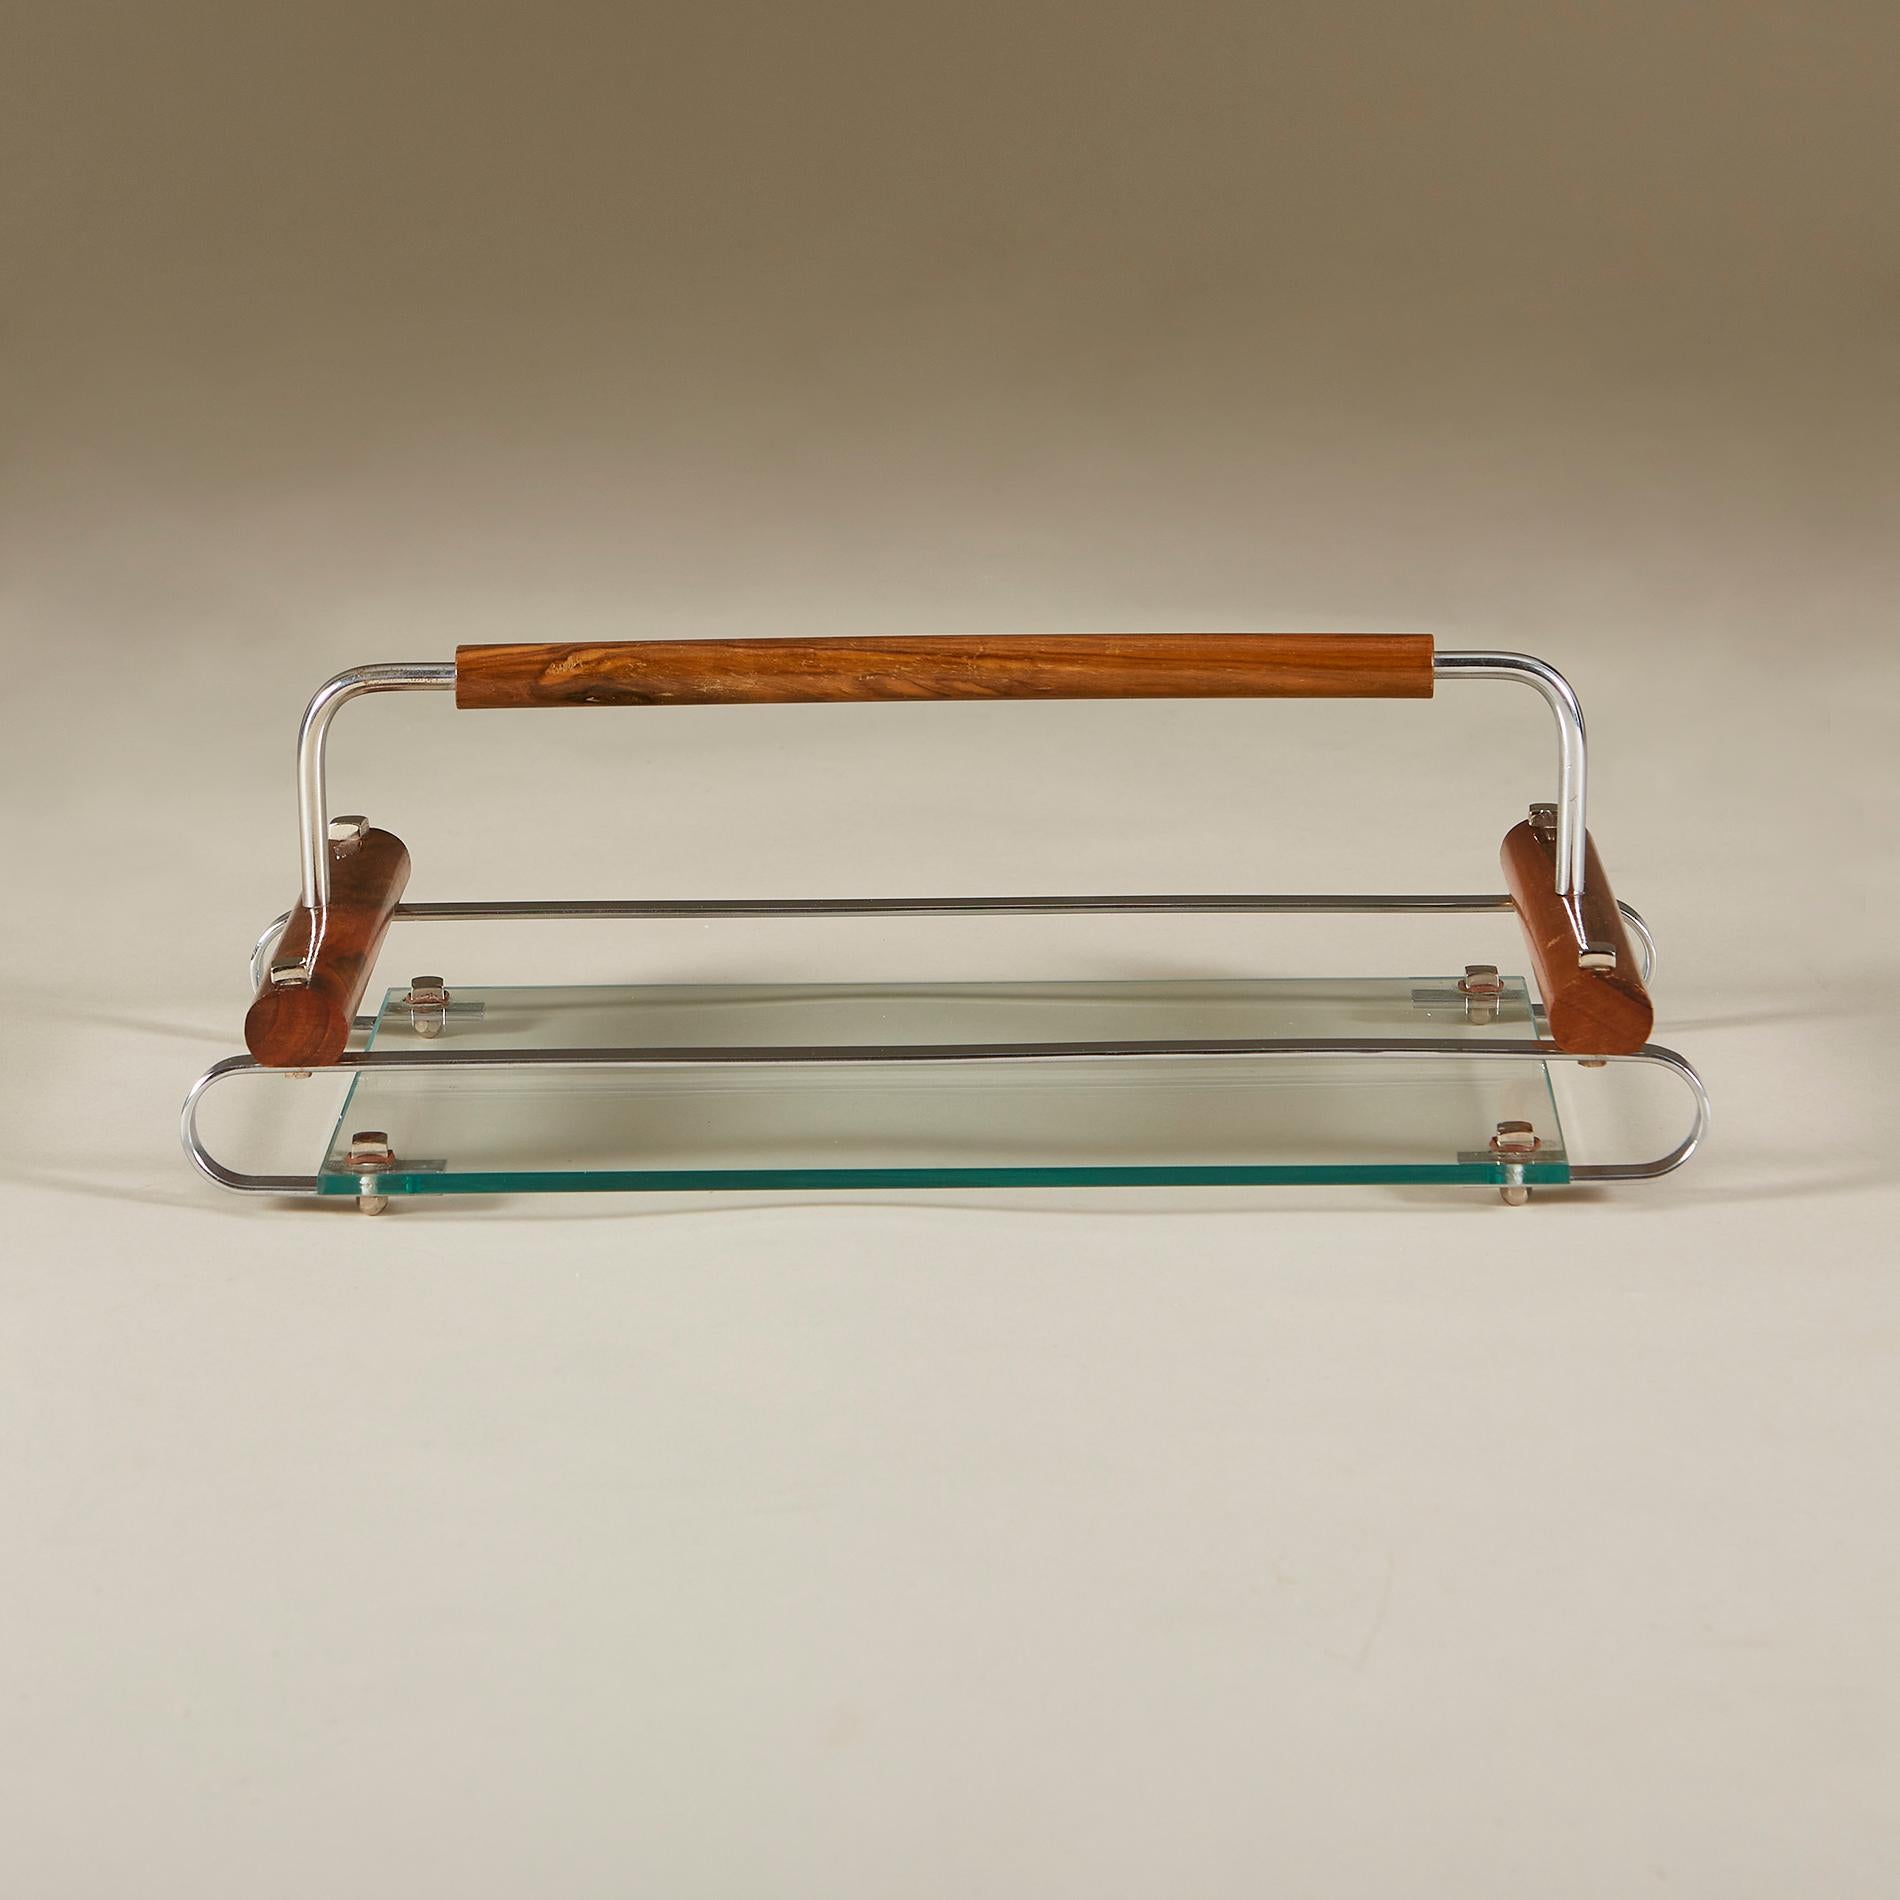 Elegant cocktail tray with fruitwood handle and fruitwood and chrome decorative frame. Glass base sits on chrome feet.